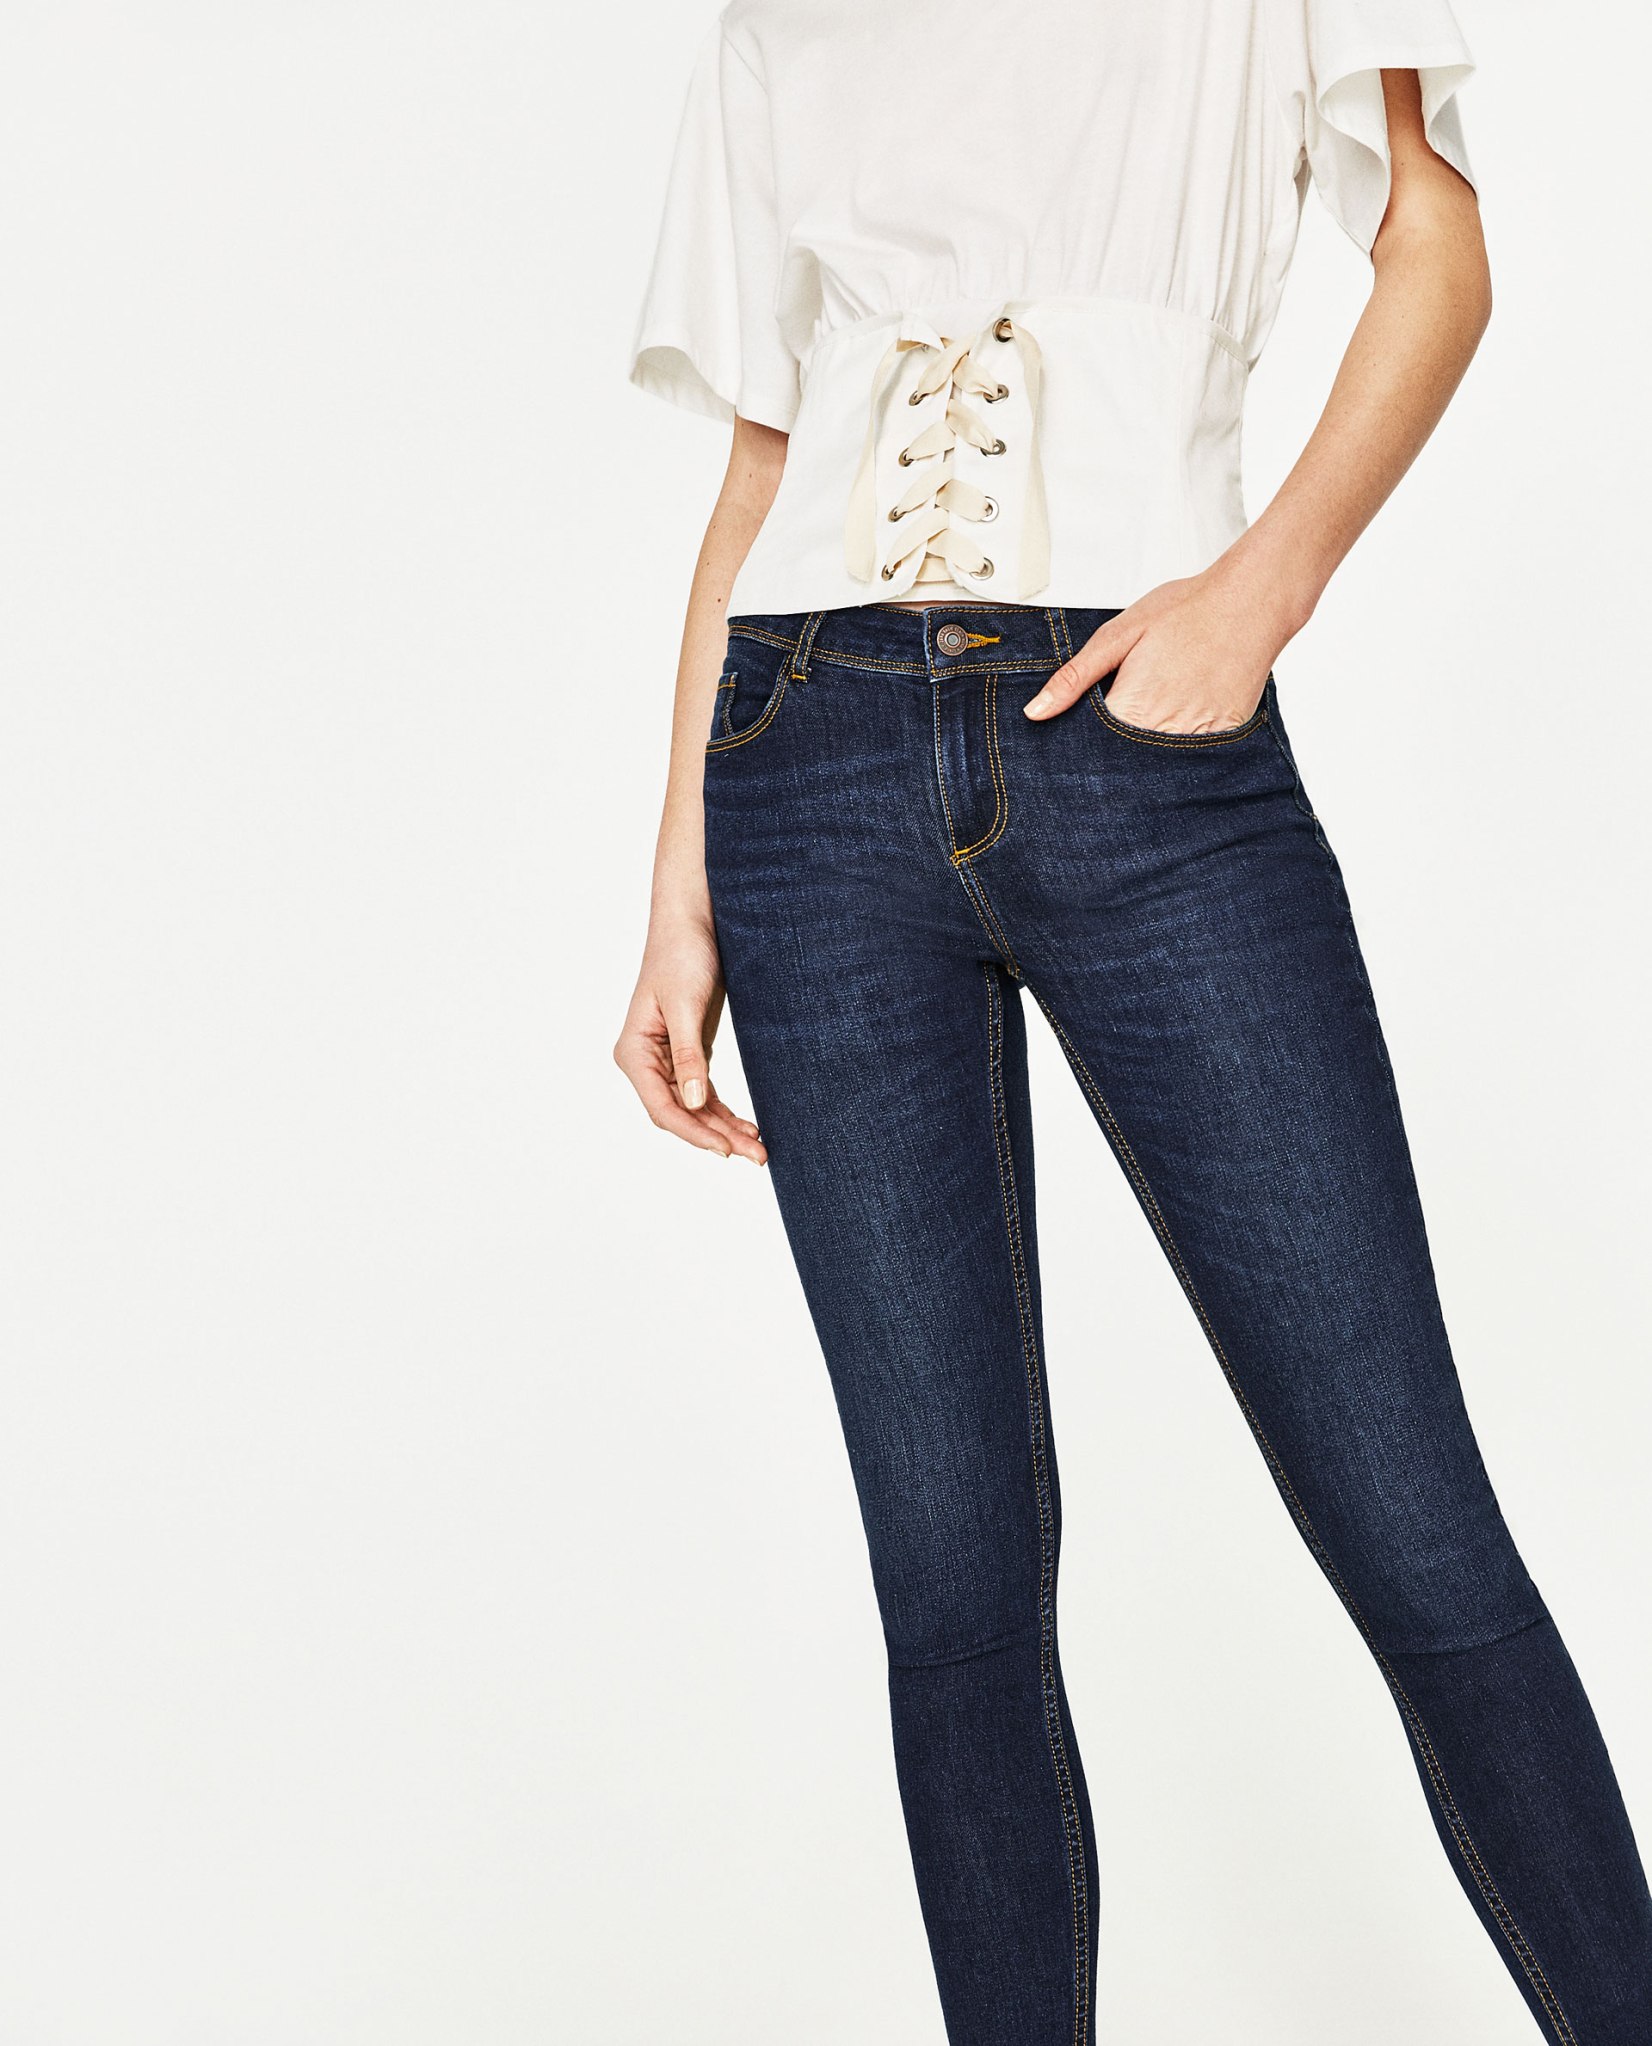 zara-mid-rise-skinny-jeans-in-dark-blue | Style Point of View Blog